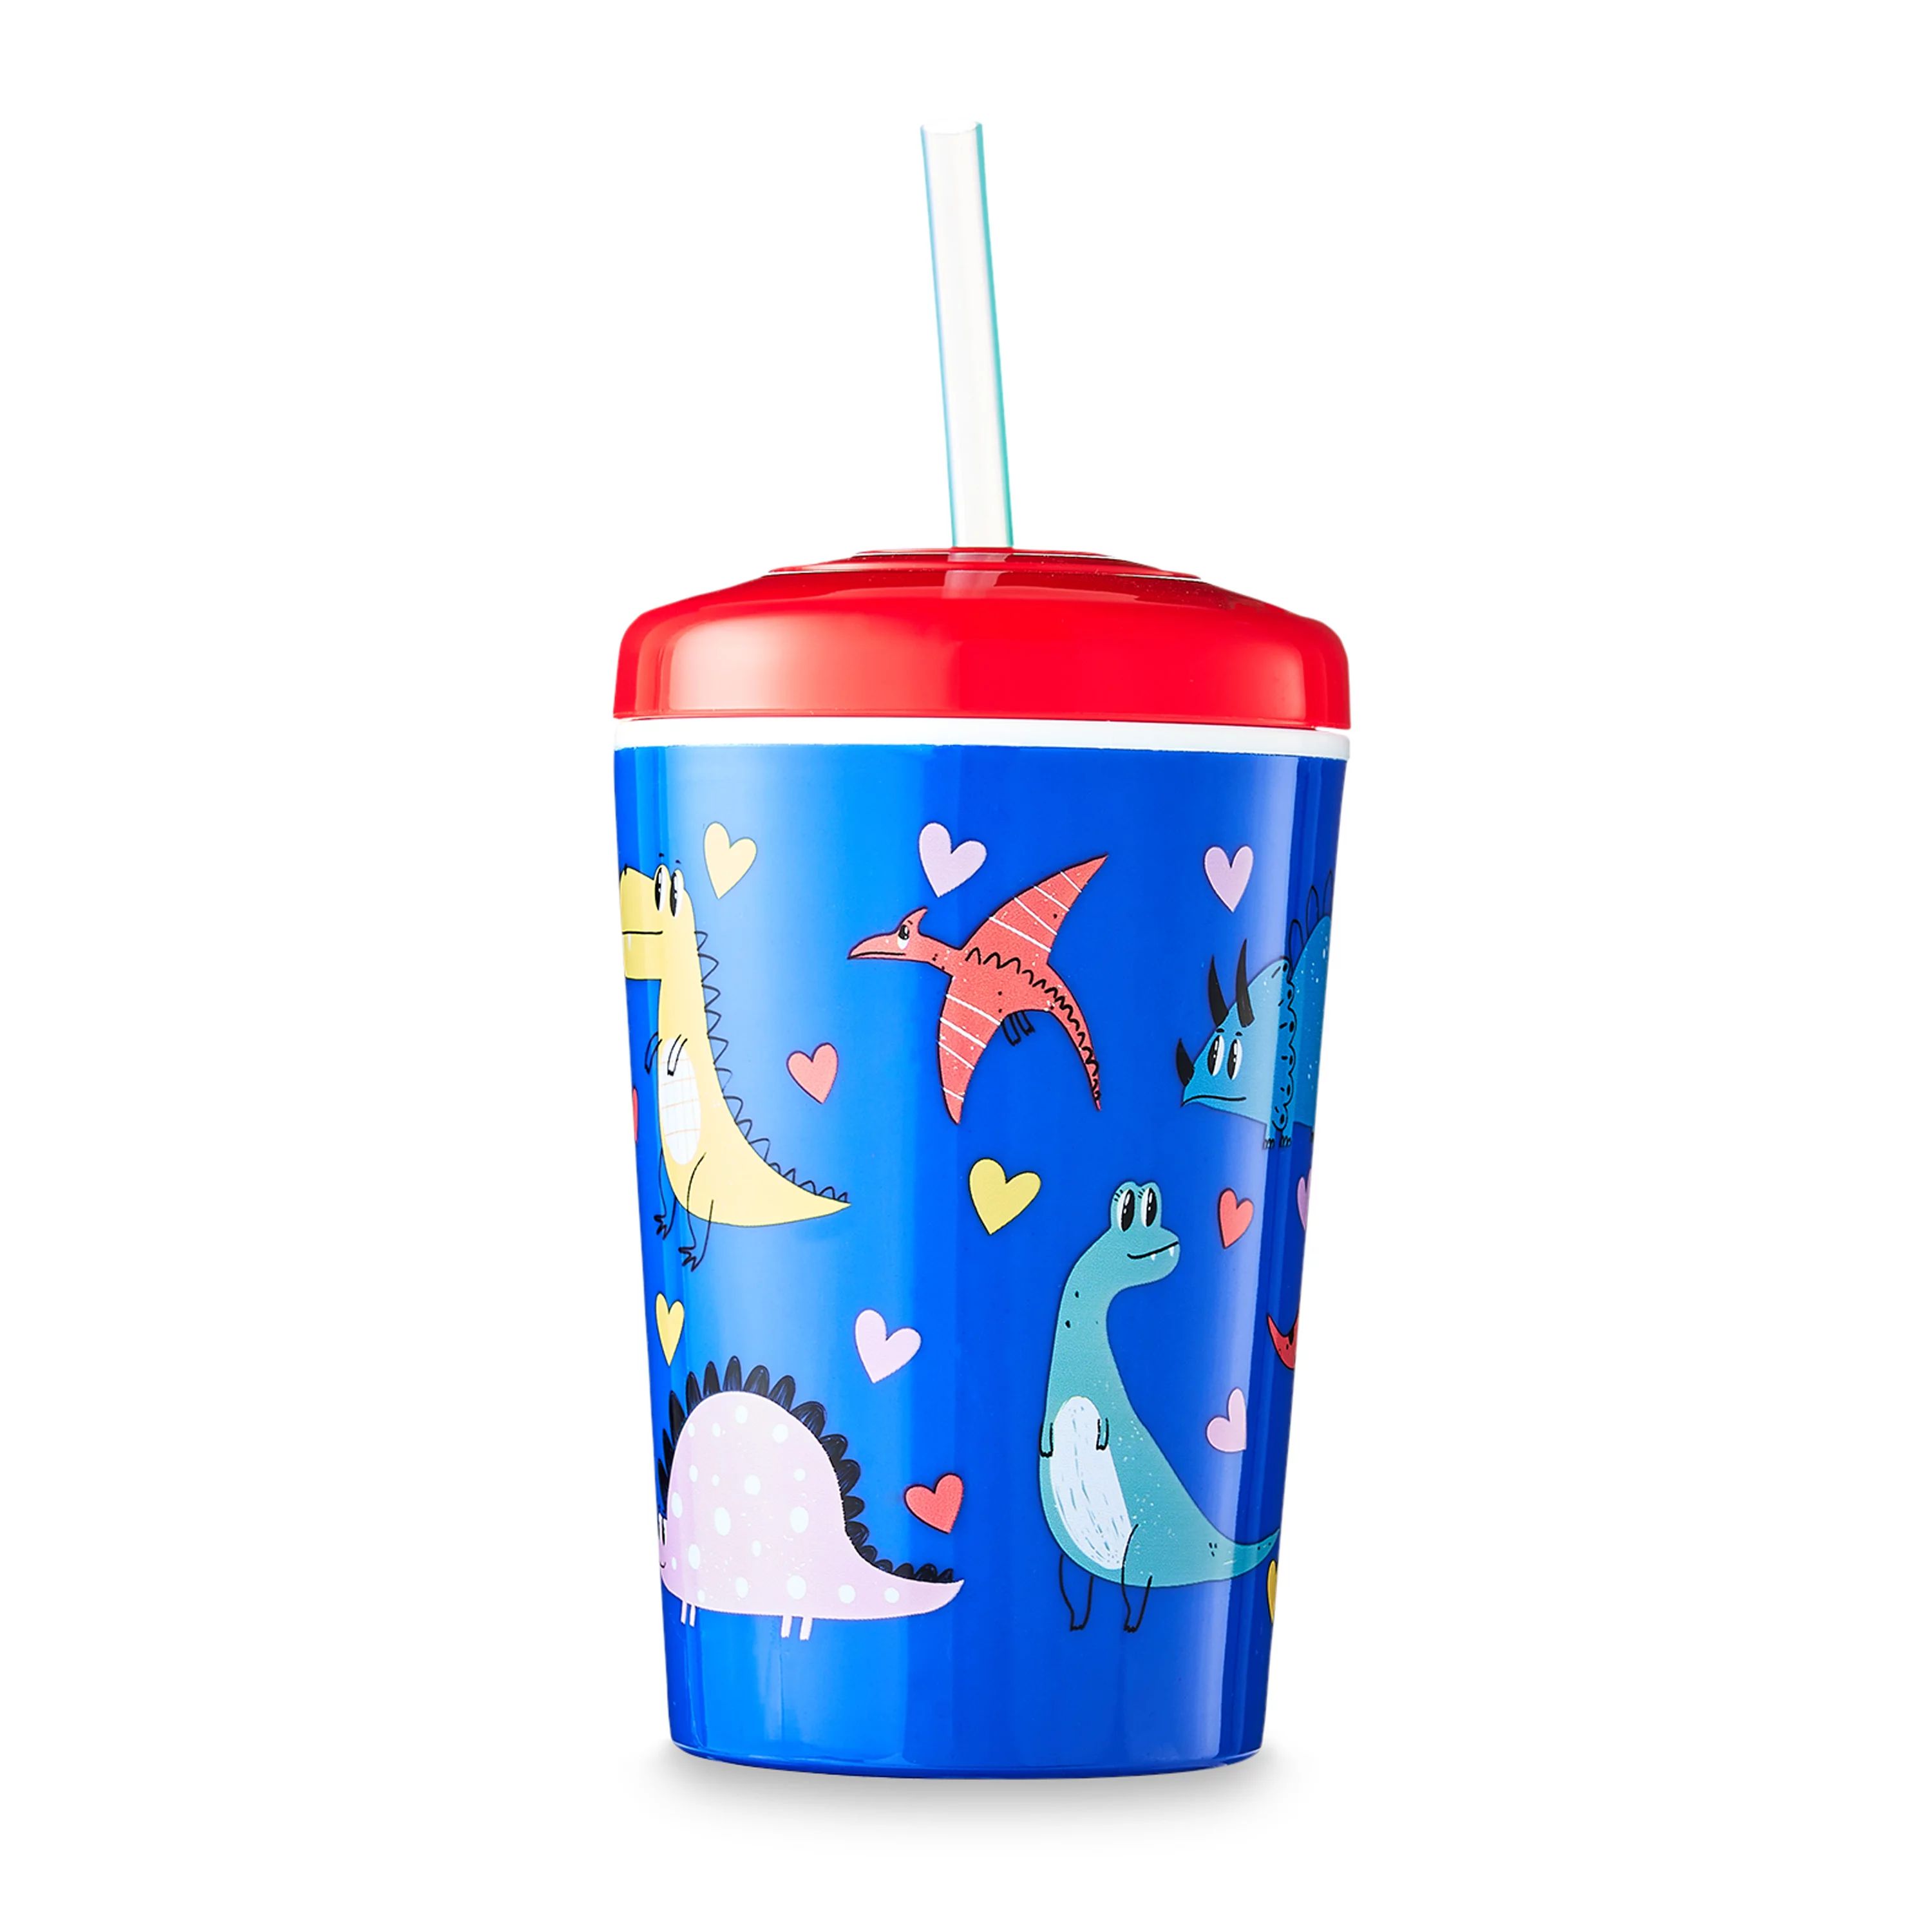 Zak Designs Mainstays Double Wall Insulated Tumbler with Straw, Scarlet | Walmart (US)